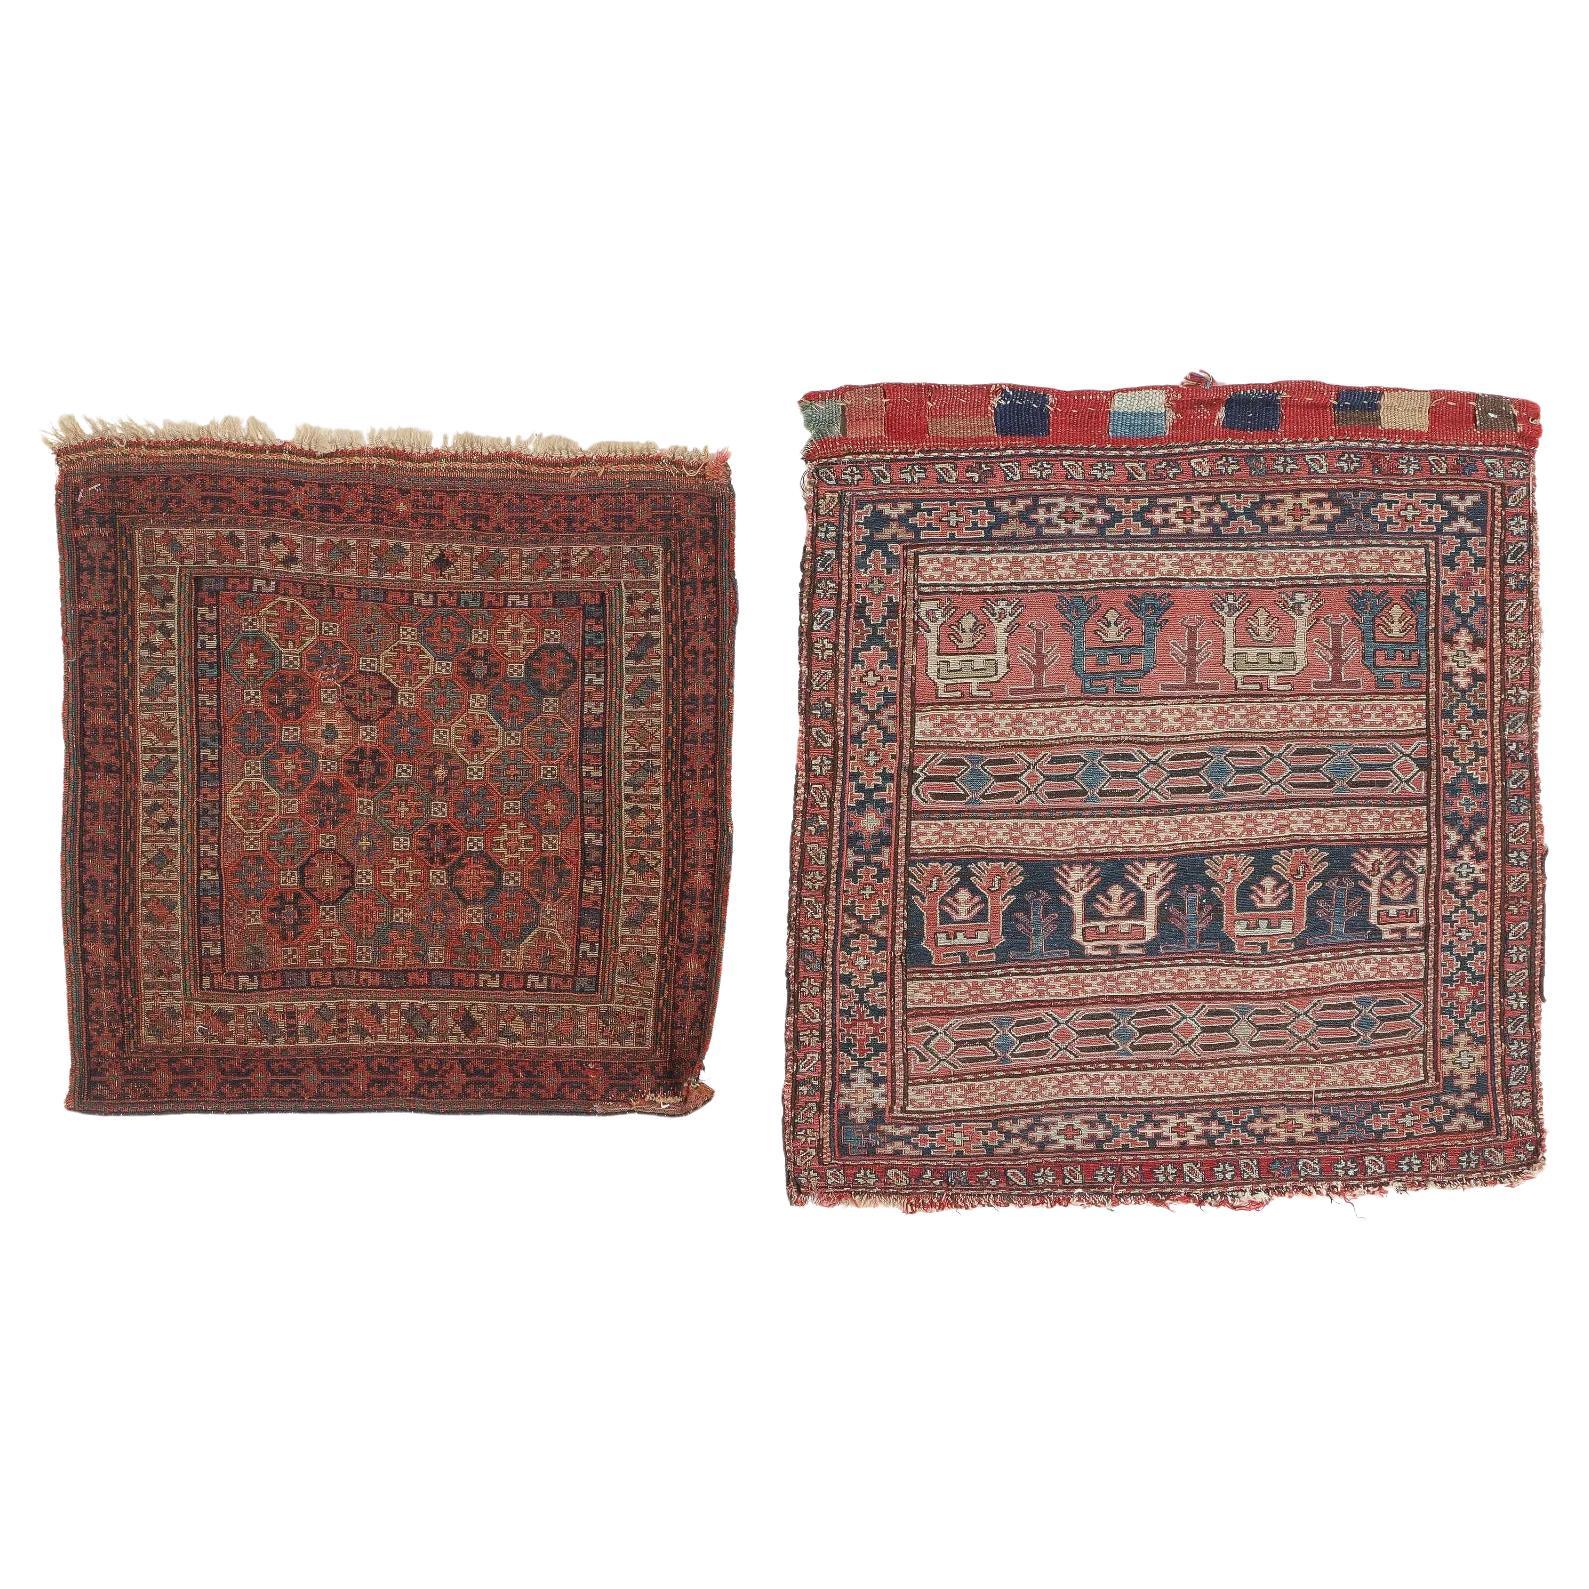 Two Antique Persian Collectible Shahsavan Sumak Rugs 1.10' x 2', 1870s - 2B28 For Sale